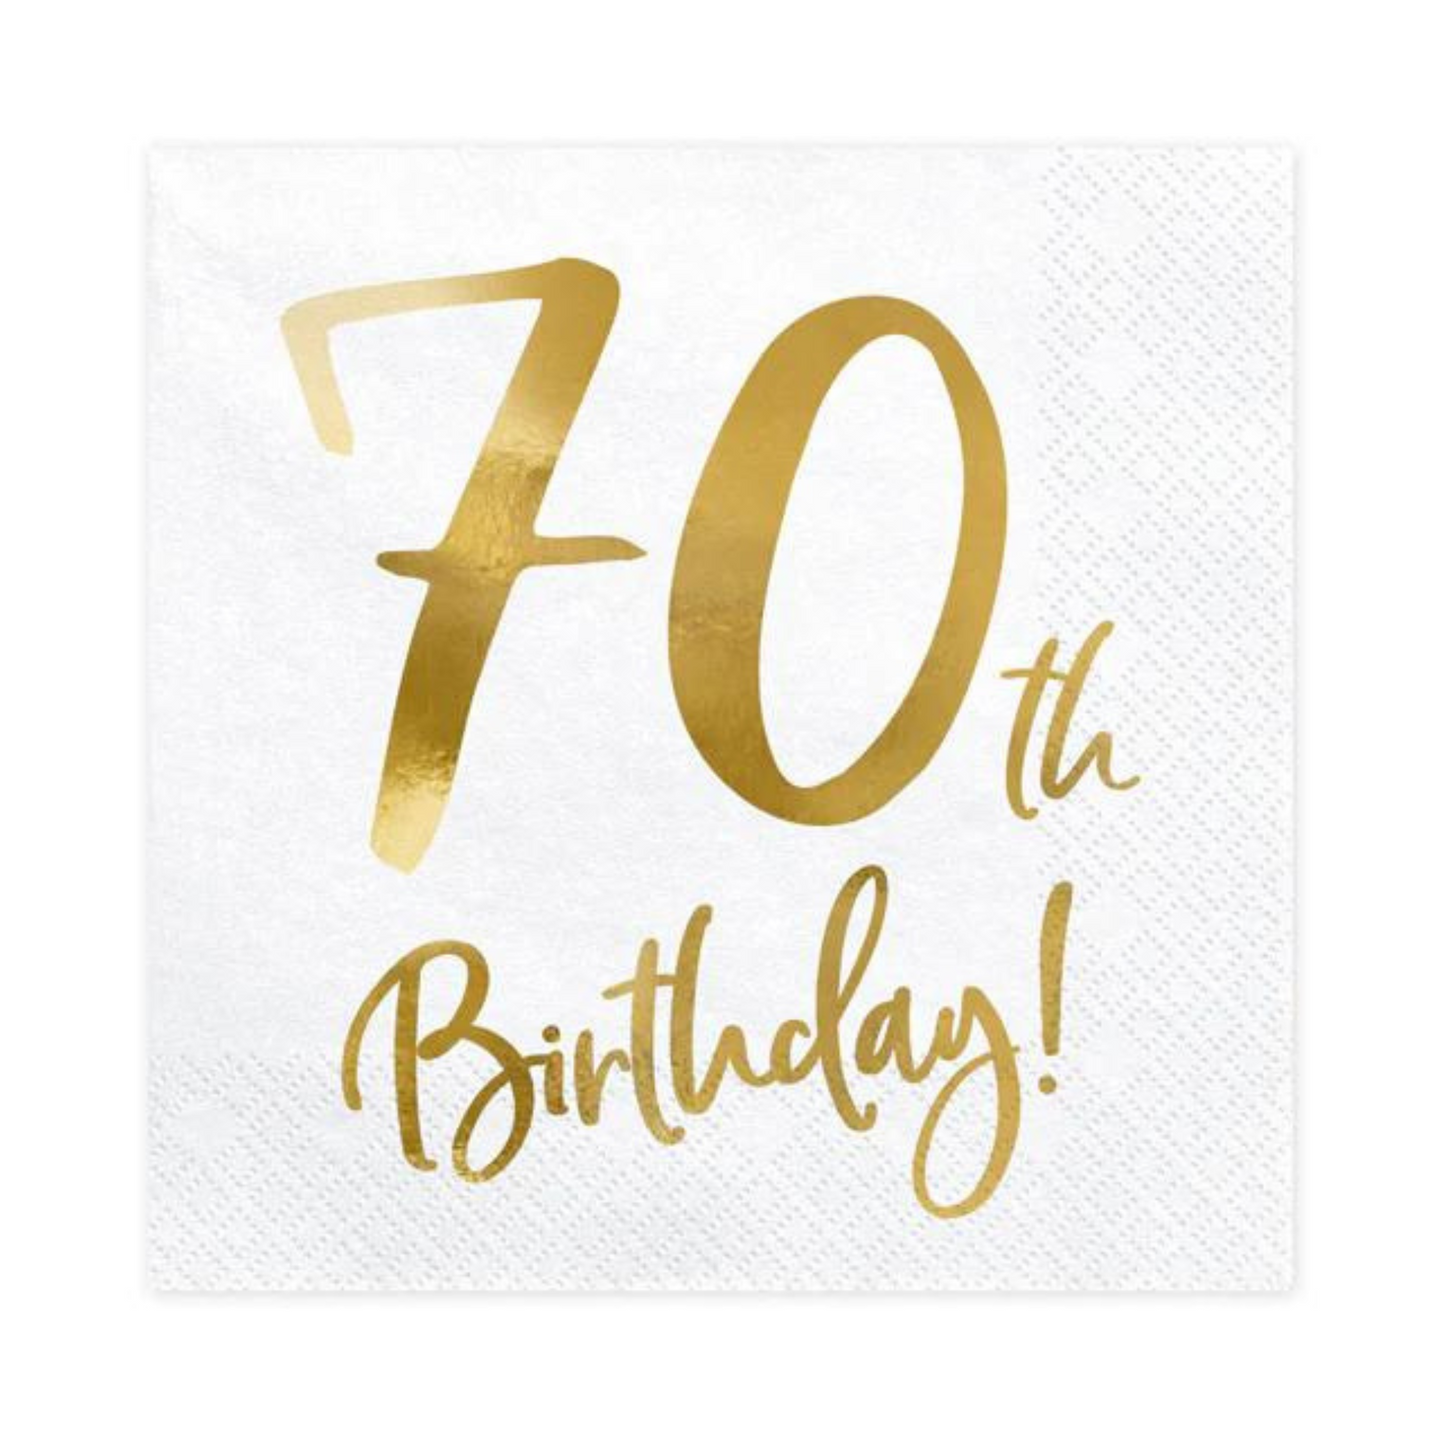 white napkins with 70th birthday in gold cursive writing